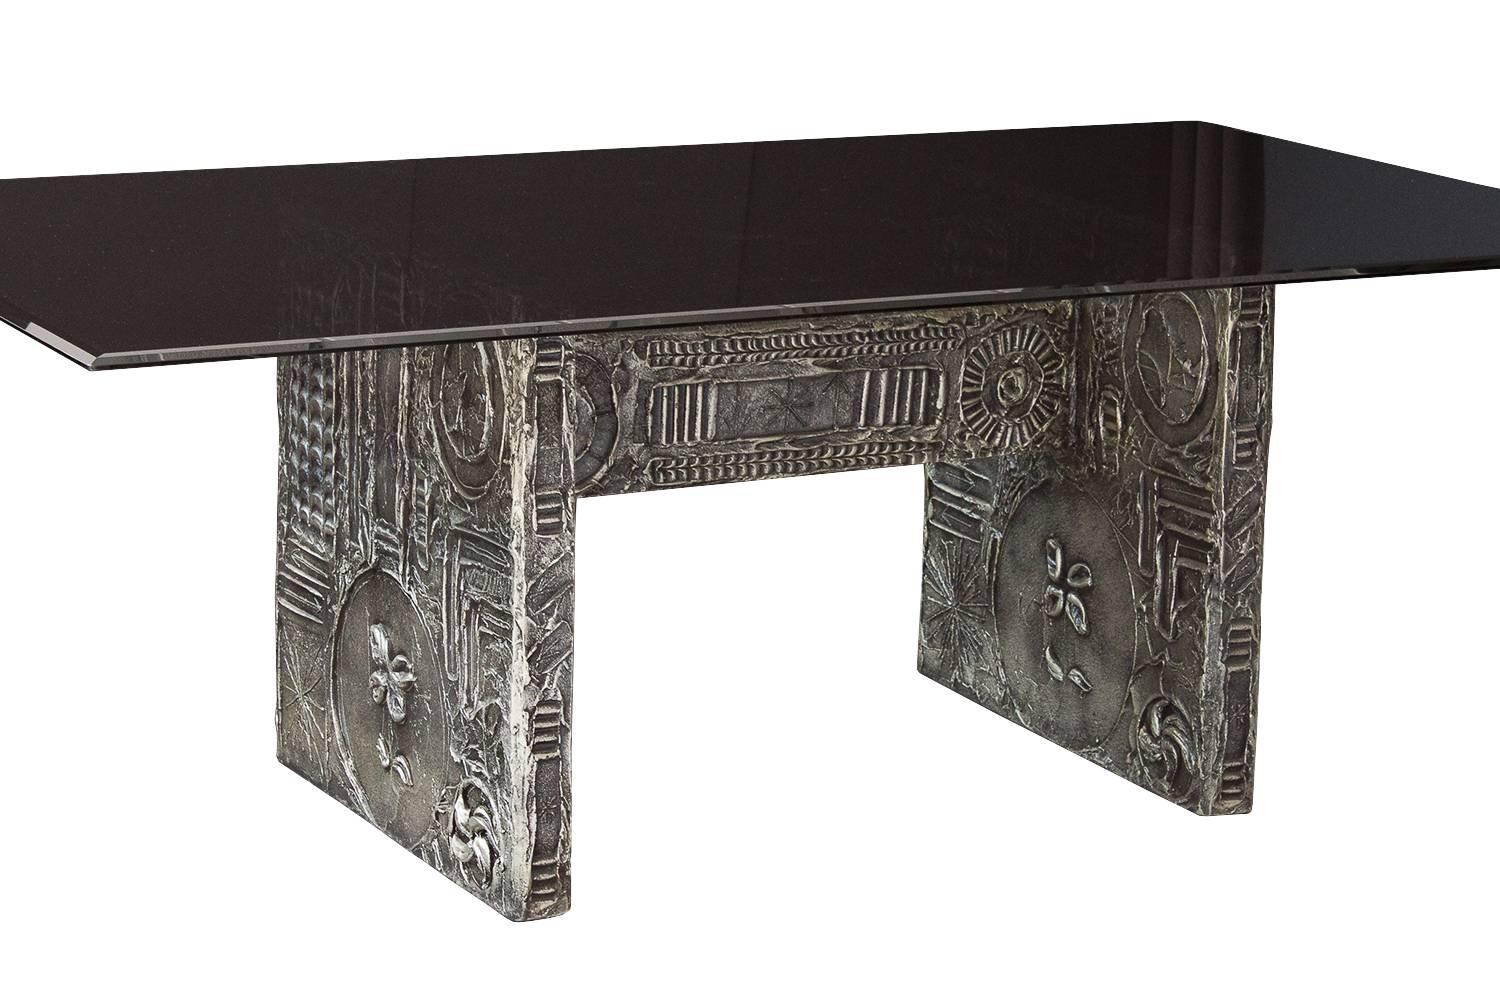 Paying homage to 'Paul Evans' sculpted bronze series, this Brutalist dining table/ desk by Adrian Pearsall features abstract motifs in a sculpted resin. The trestle base is decorated in a high relief sculptural warm silver and black resin. Double